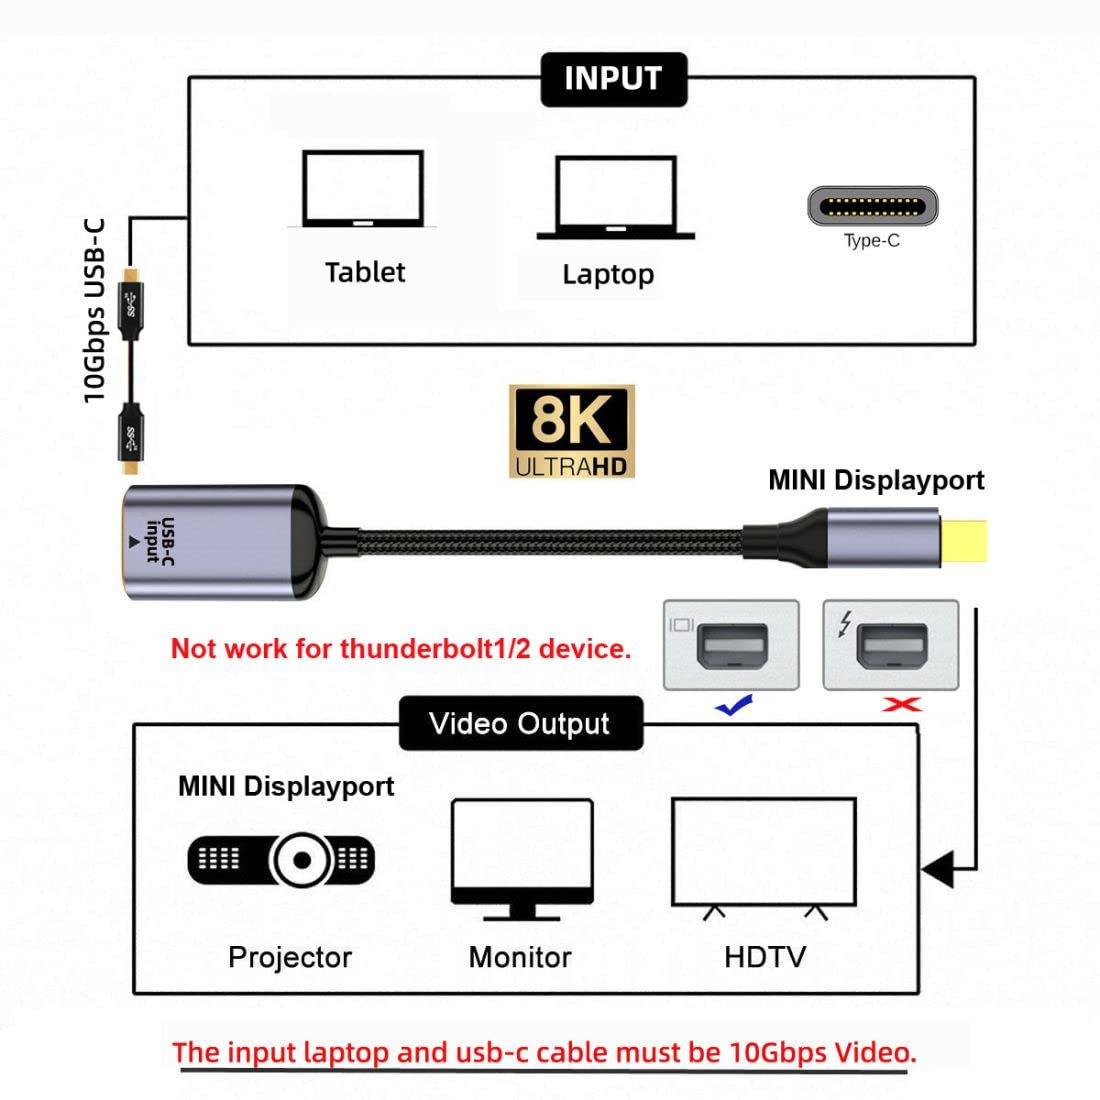 chenyang CY USB C to Mini Displayport Cable,USB Type C Female Input to Mini Displayport 1.4 Male Output HDTV Cable 8K@60hz 4K@120hz for Tablet Phone Laptop